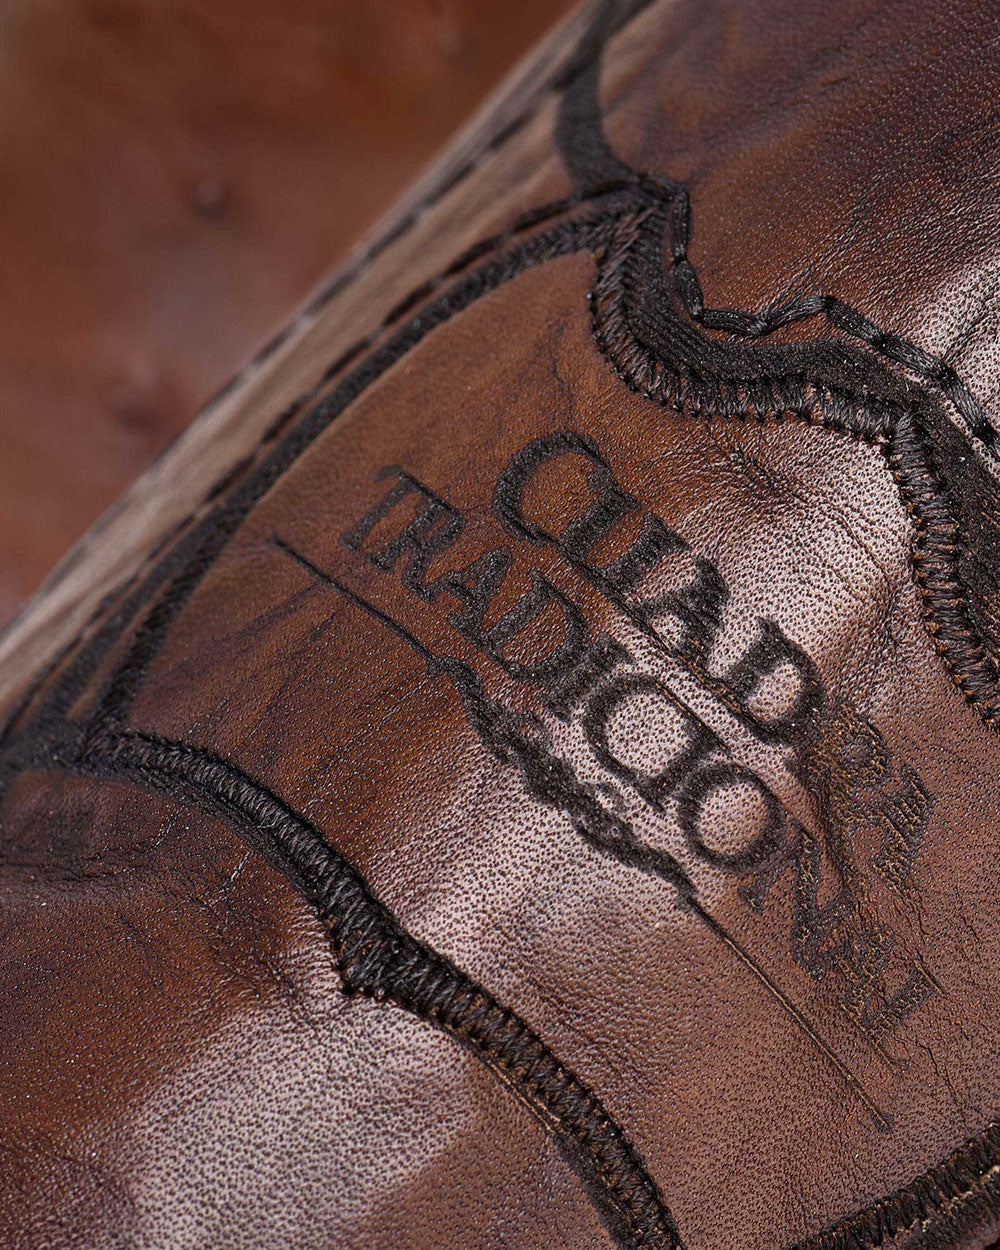 Ostrich Leather Boots with Monogram: Men's boots featuring premium ostrich leather and a sleek Cuadra monogram.